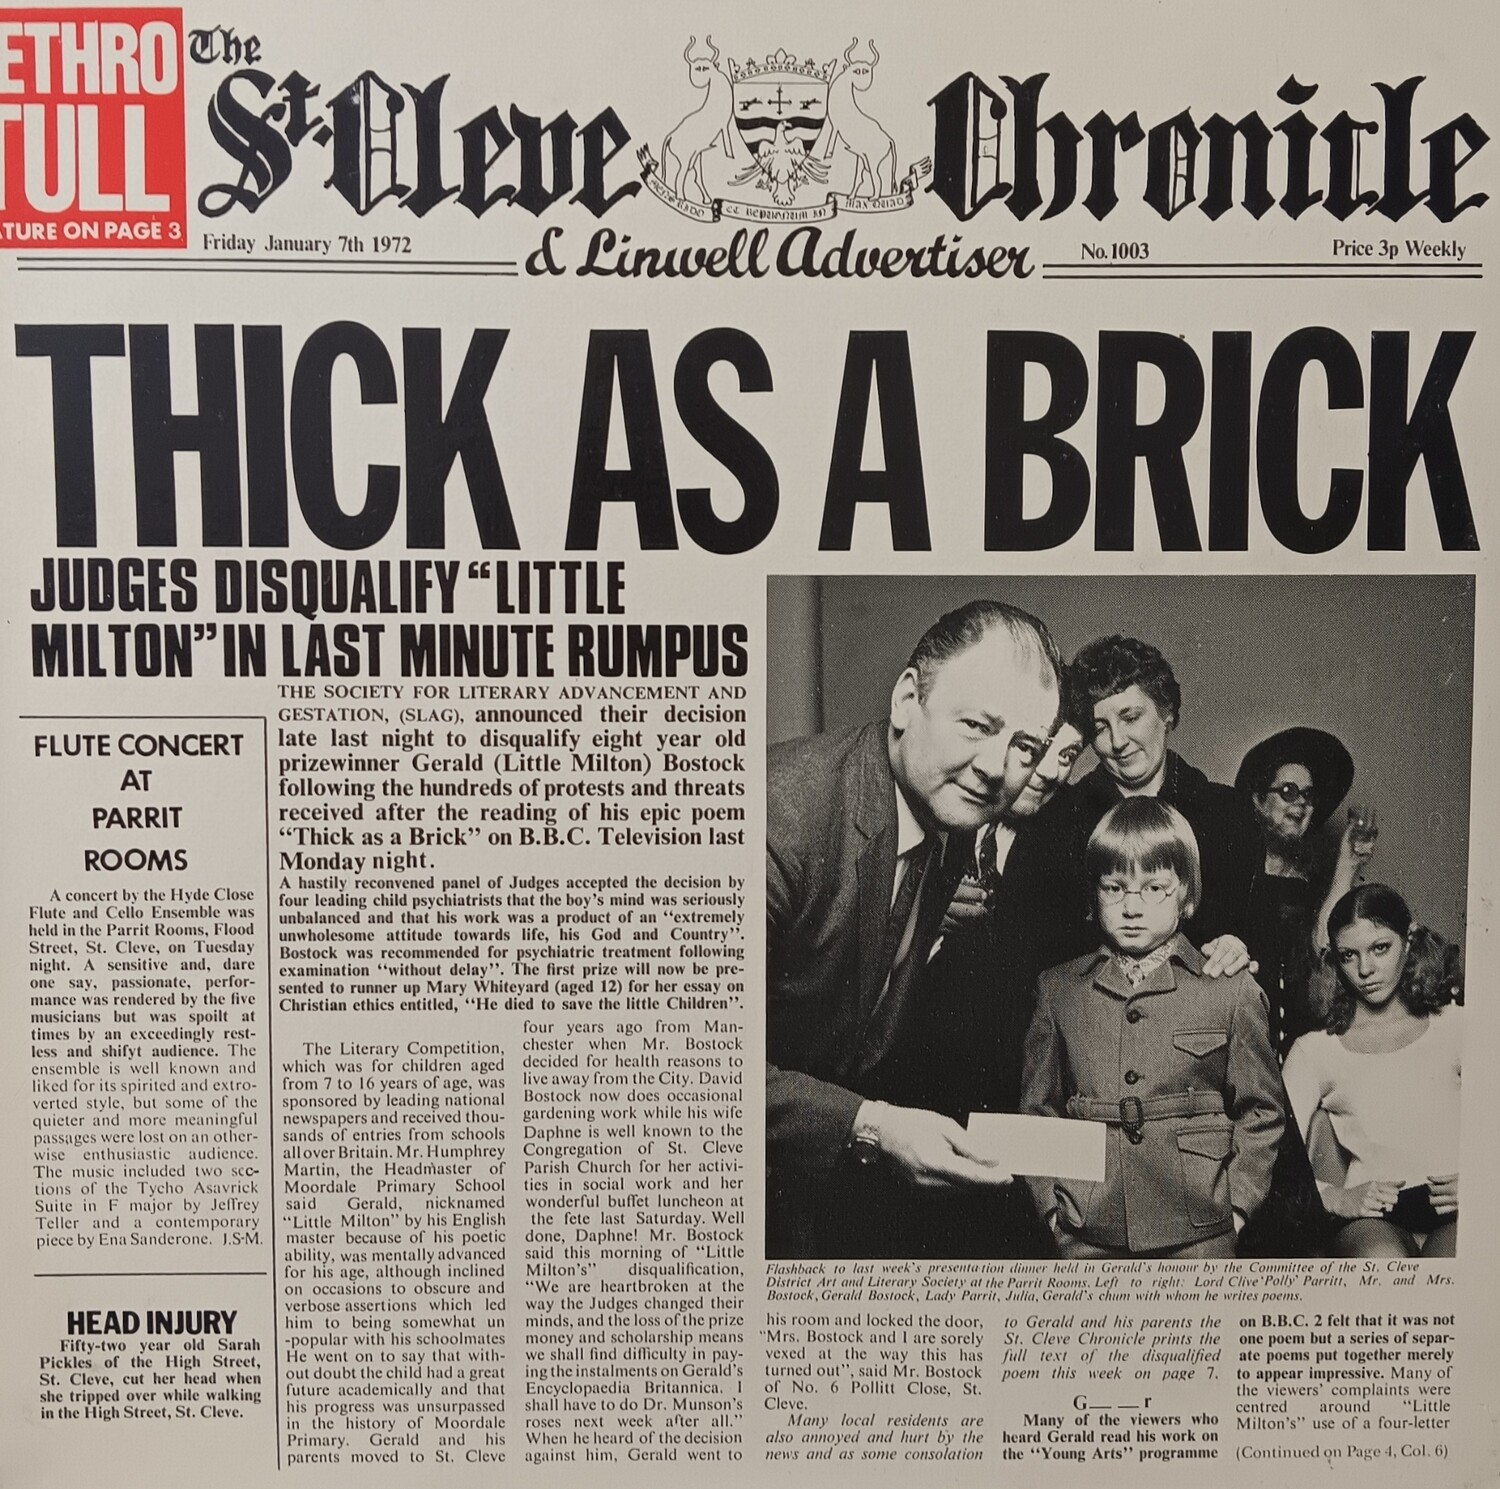 JETHRO TULL - Thick as a brick